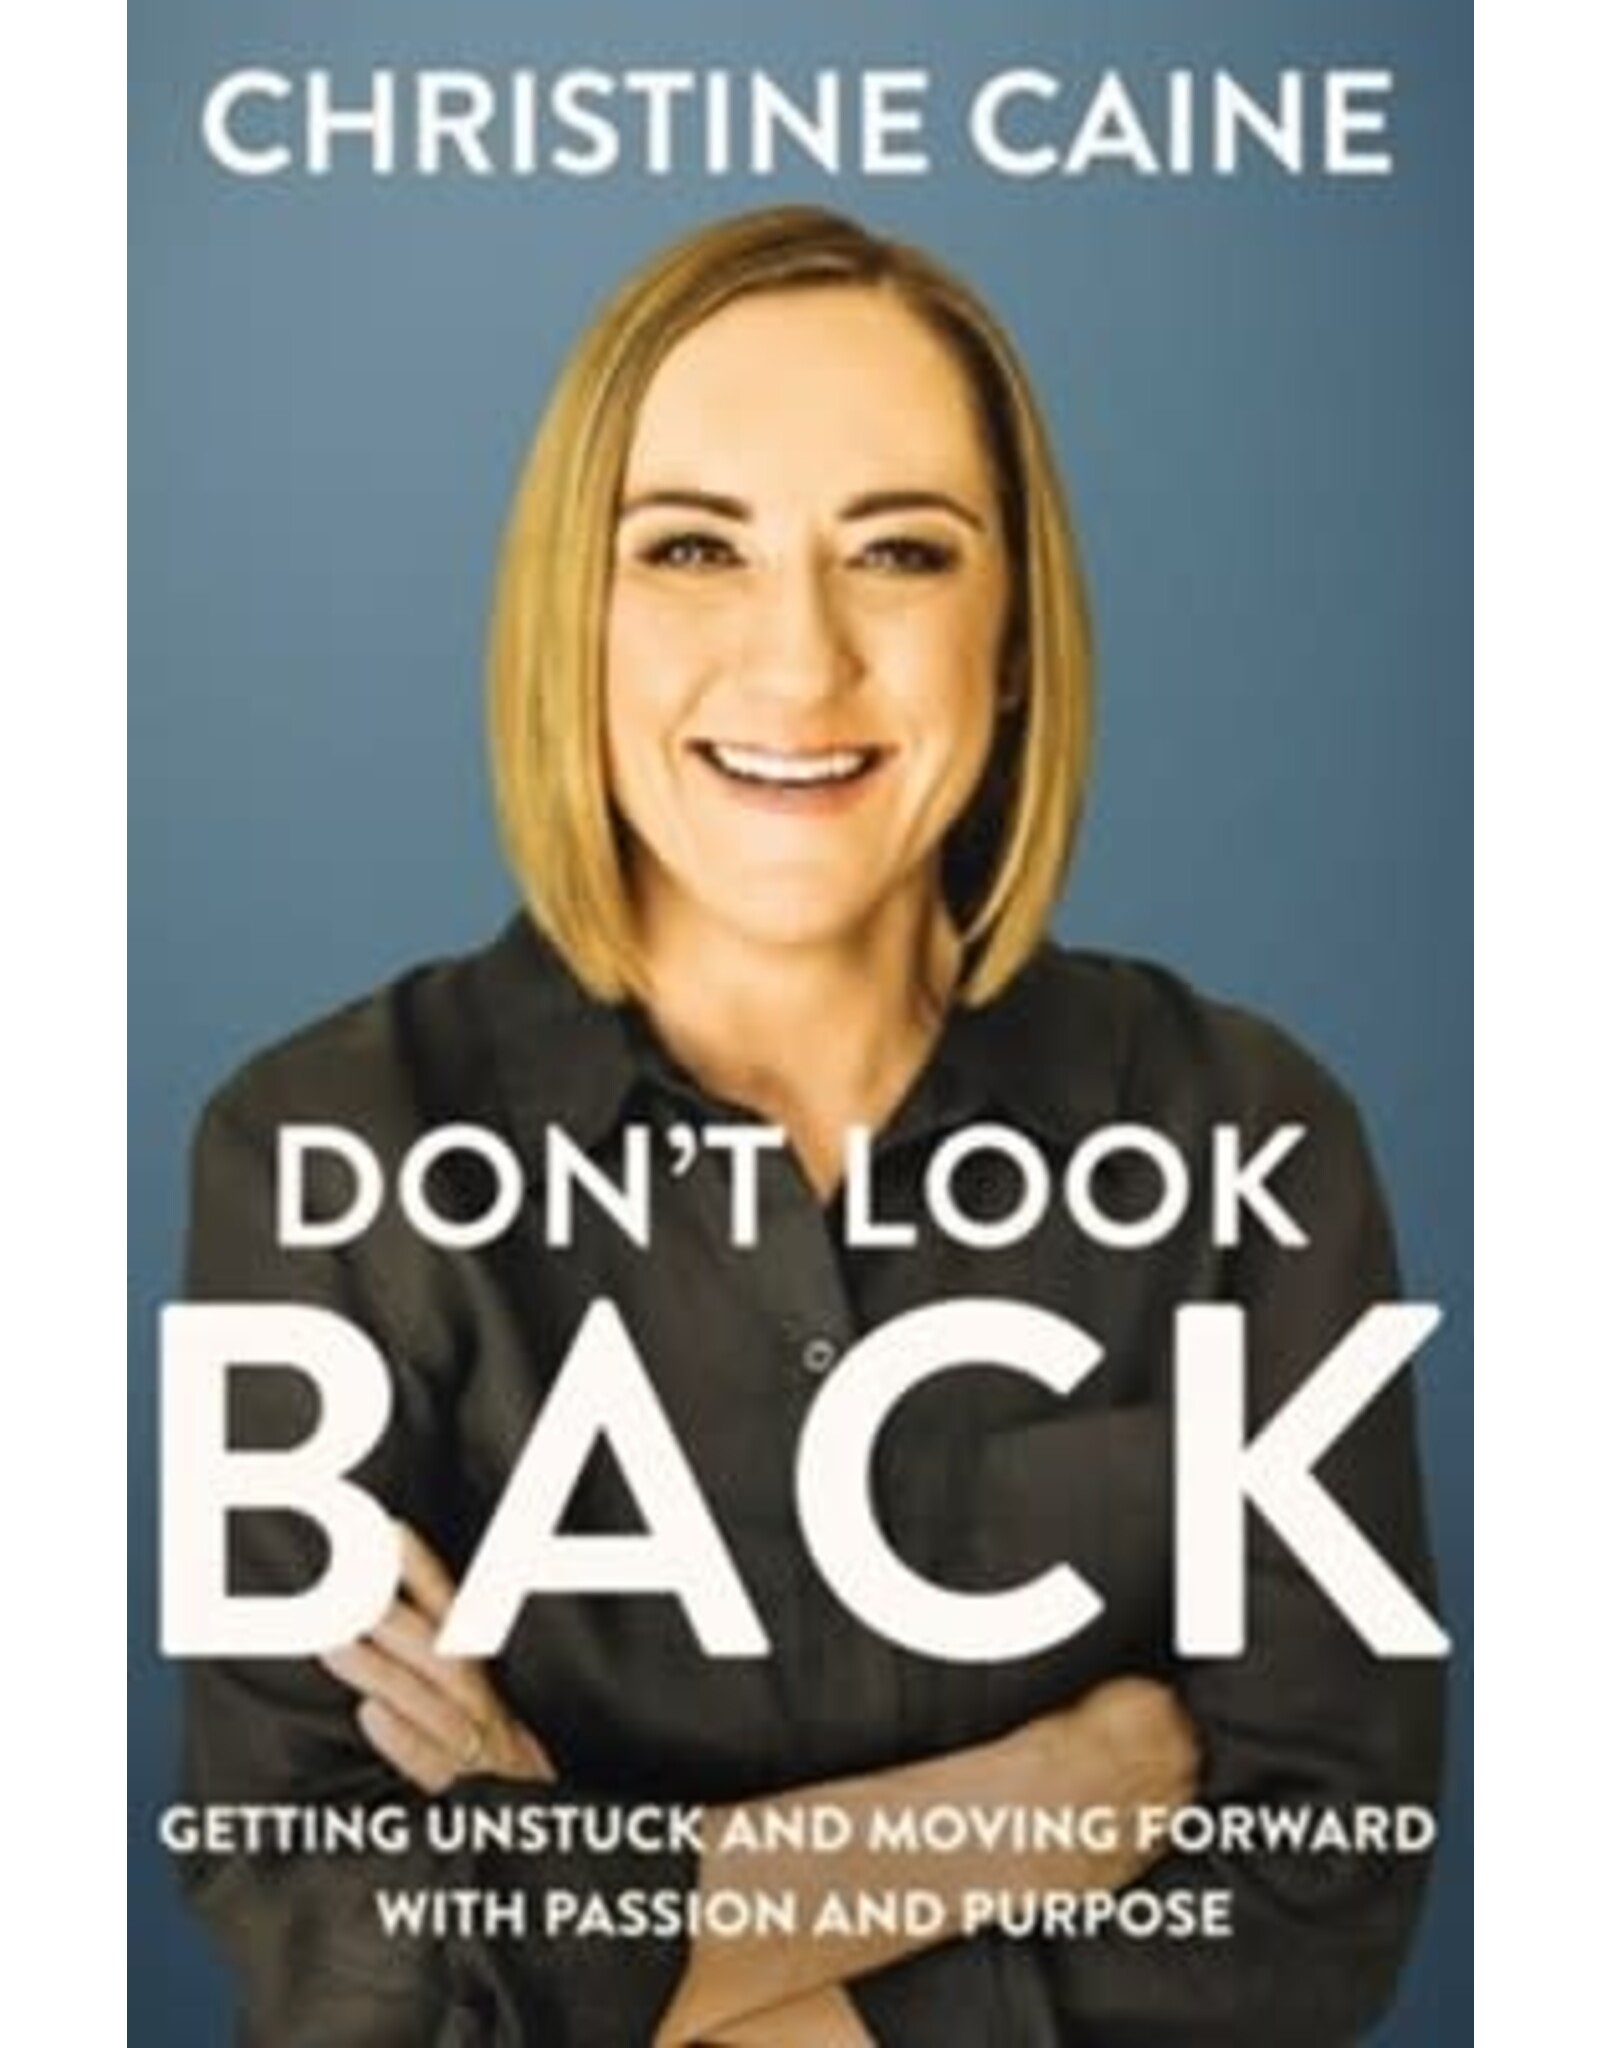 Don’t Look Back by Christine Caine